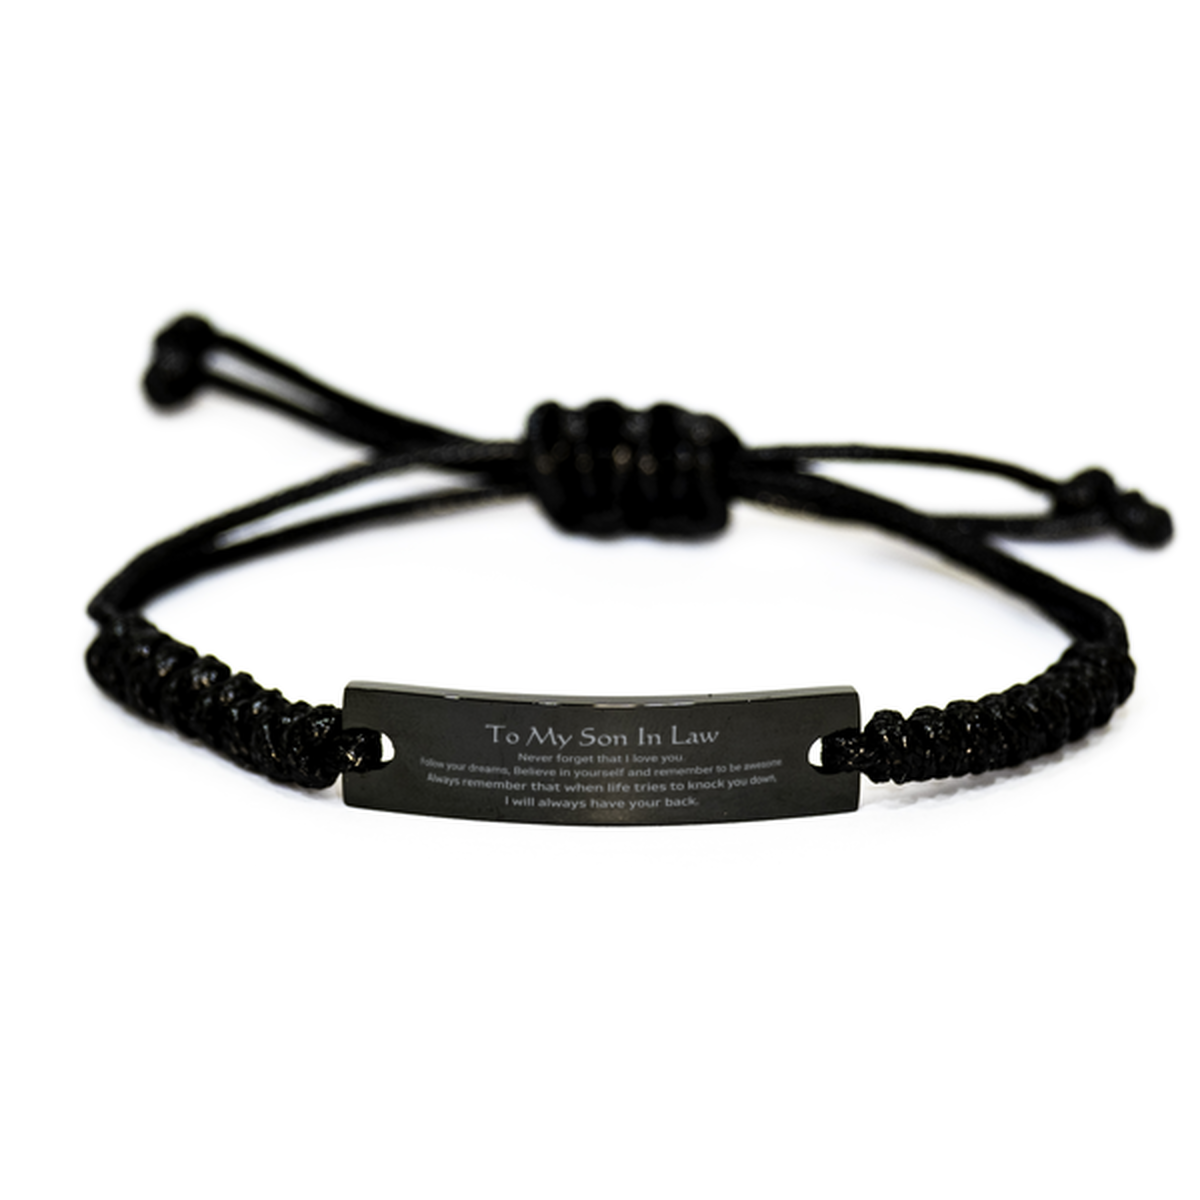 Inspirational Gifts for Son In Law, Follow your dreams, Believe in yourself, Son In Law Black Rope Bracelet, Birthday Christmas Unique Gifts For Son In Law